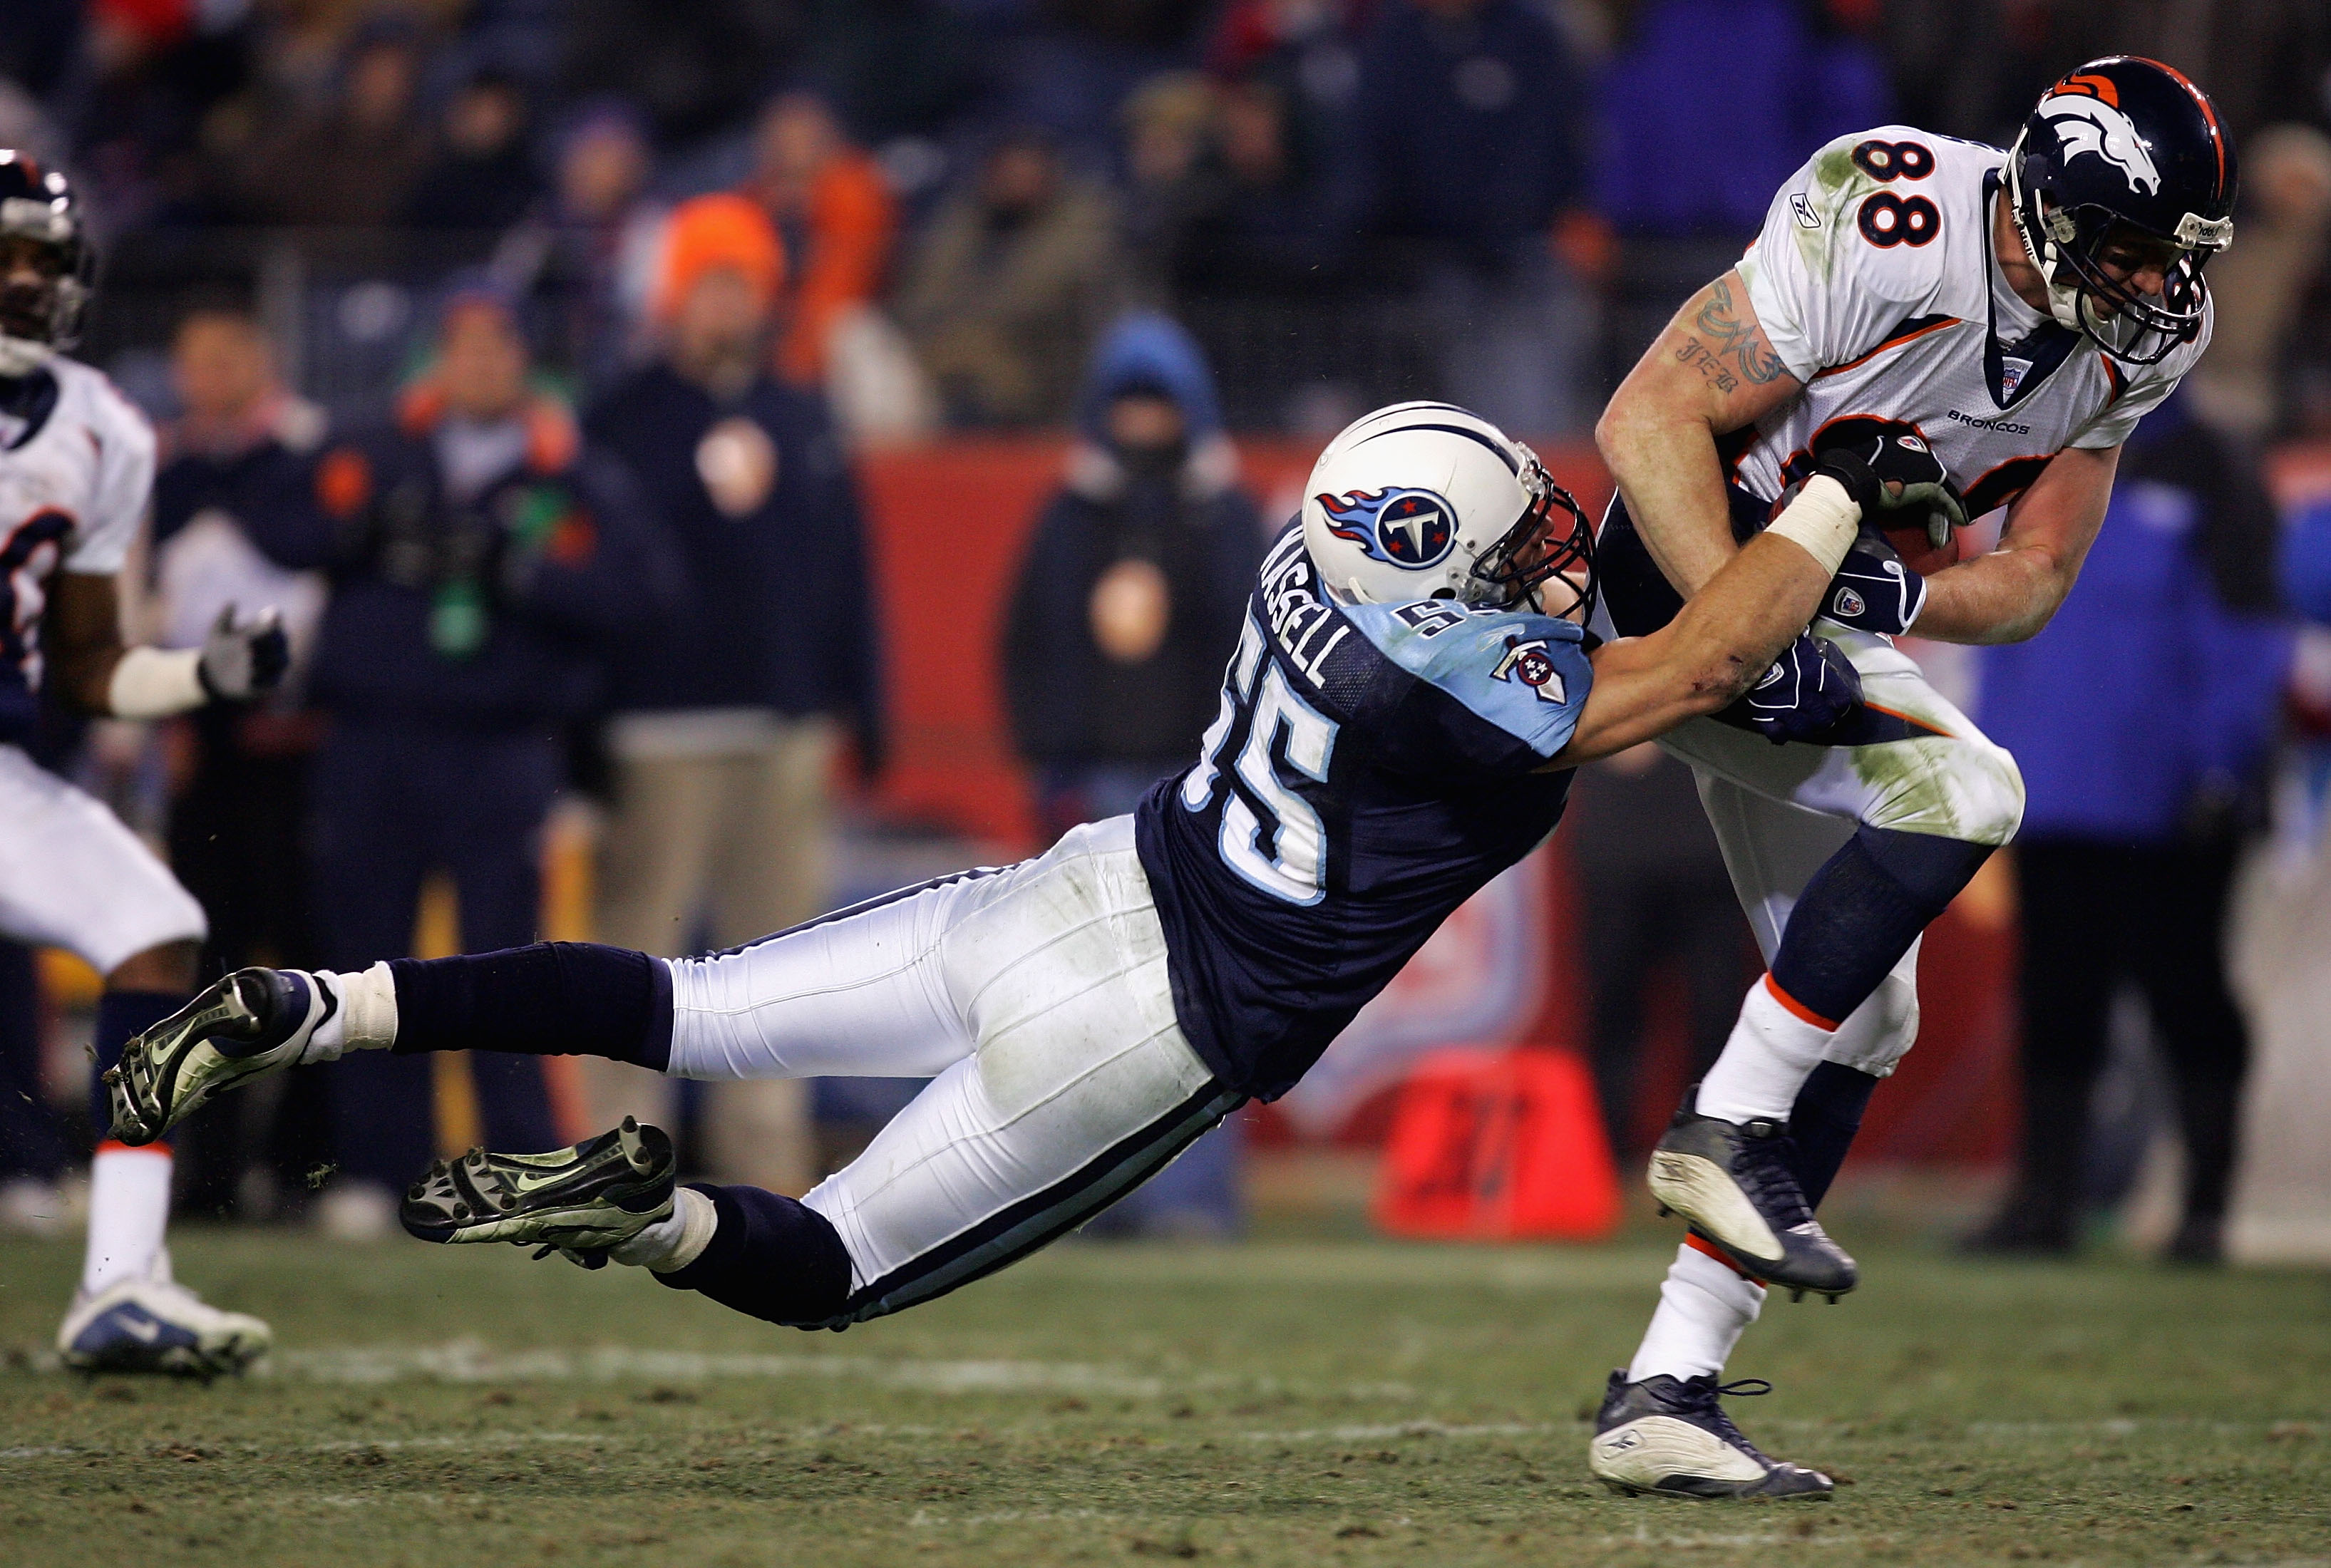 A player on the denver broncos grips the football at his hip while a player on the titans stretches airborn to try and strip it.